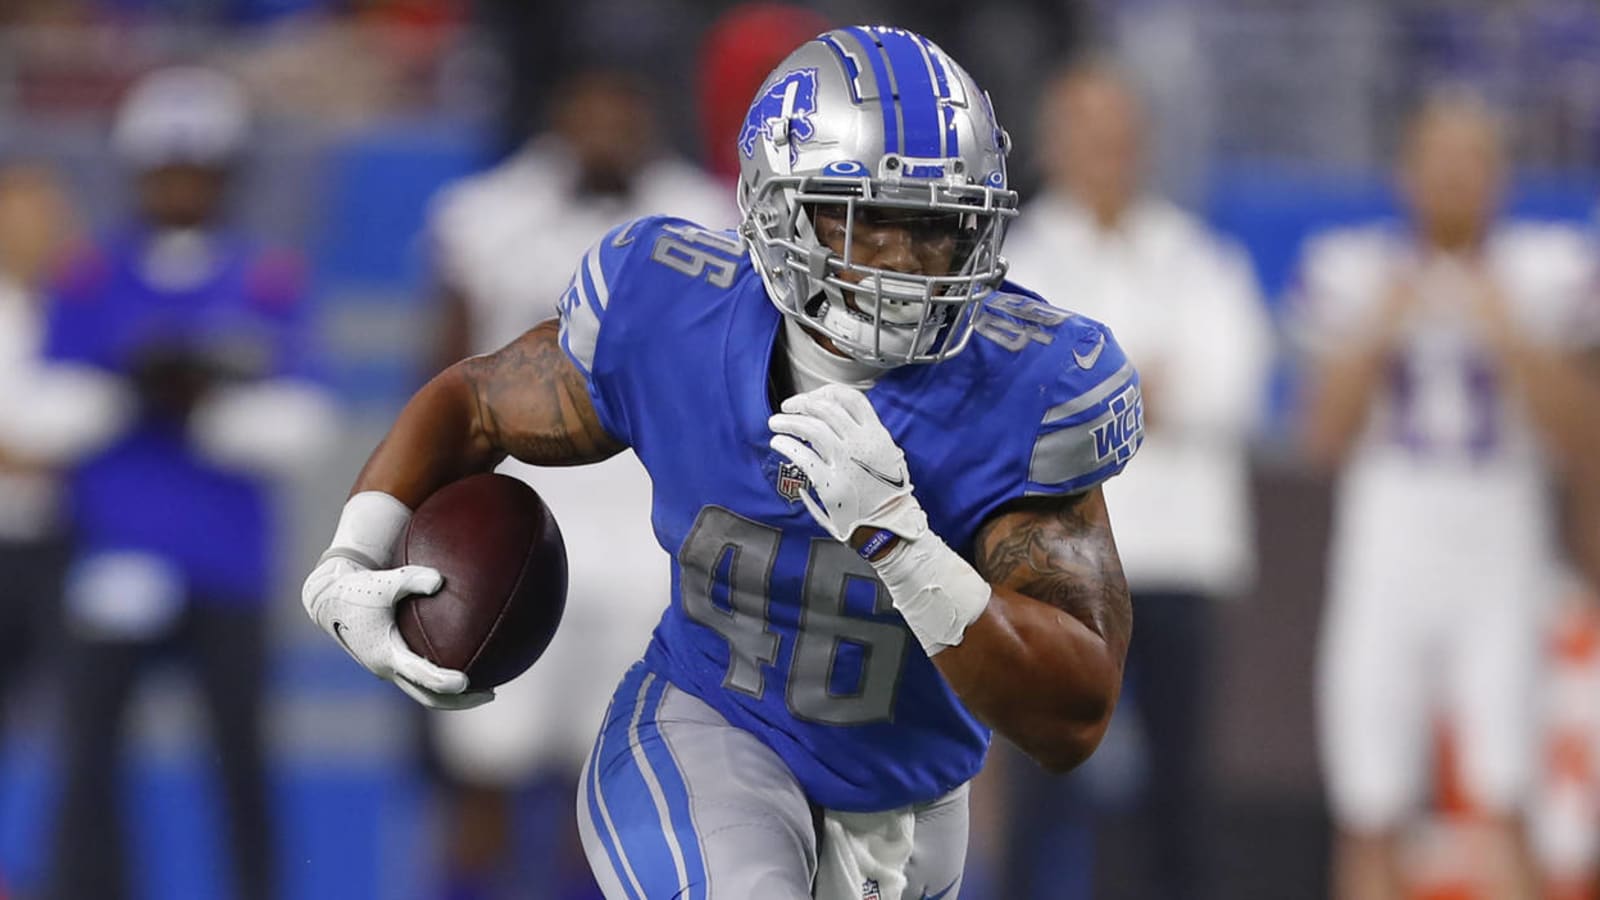 New Lions RB Craig Reynolds has whirlwind debut: 'I introduced myself in the huddle'